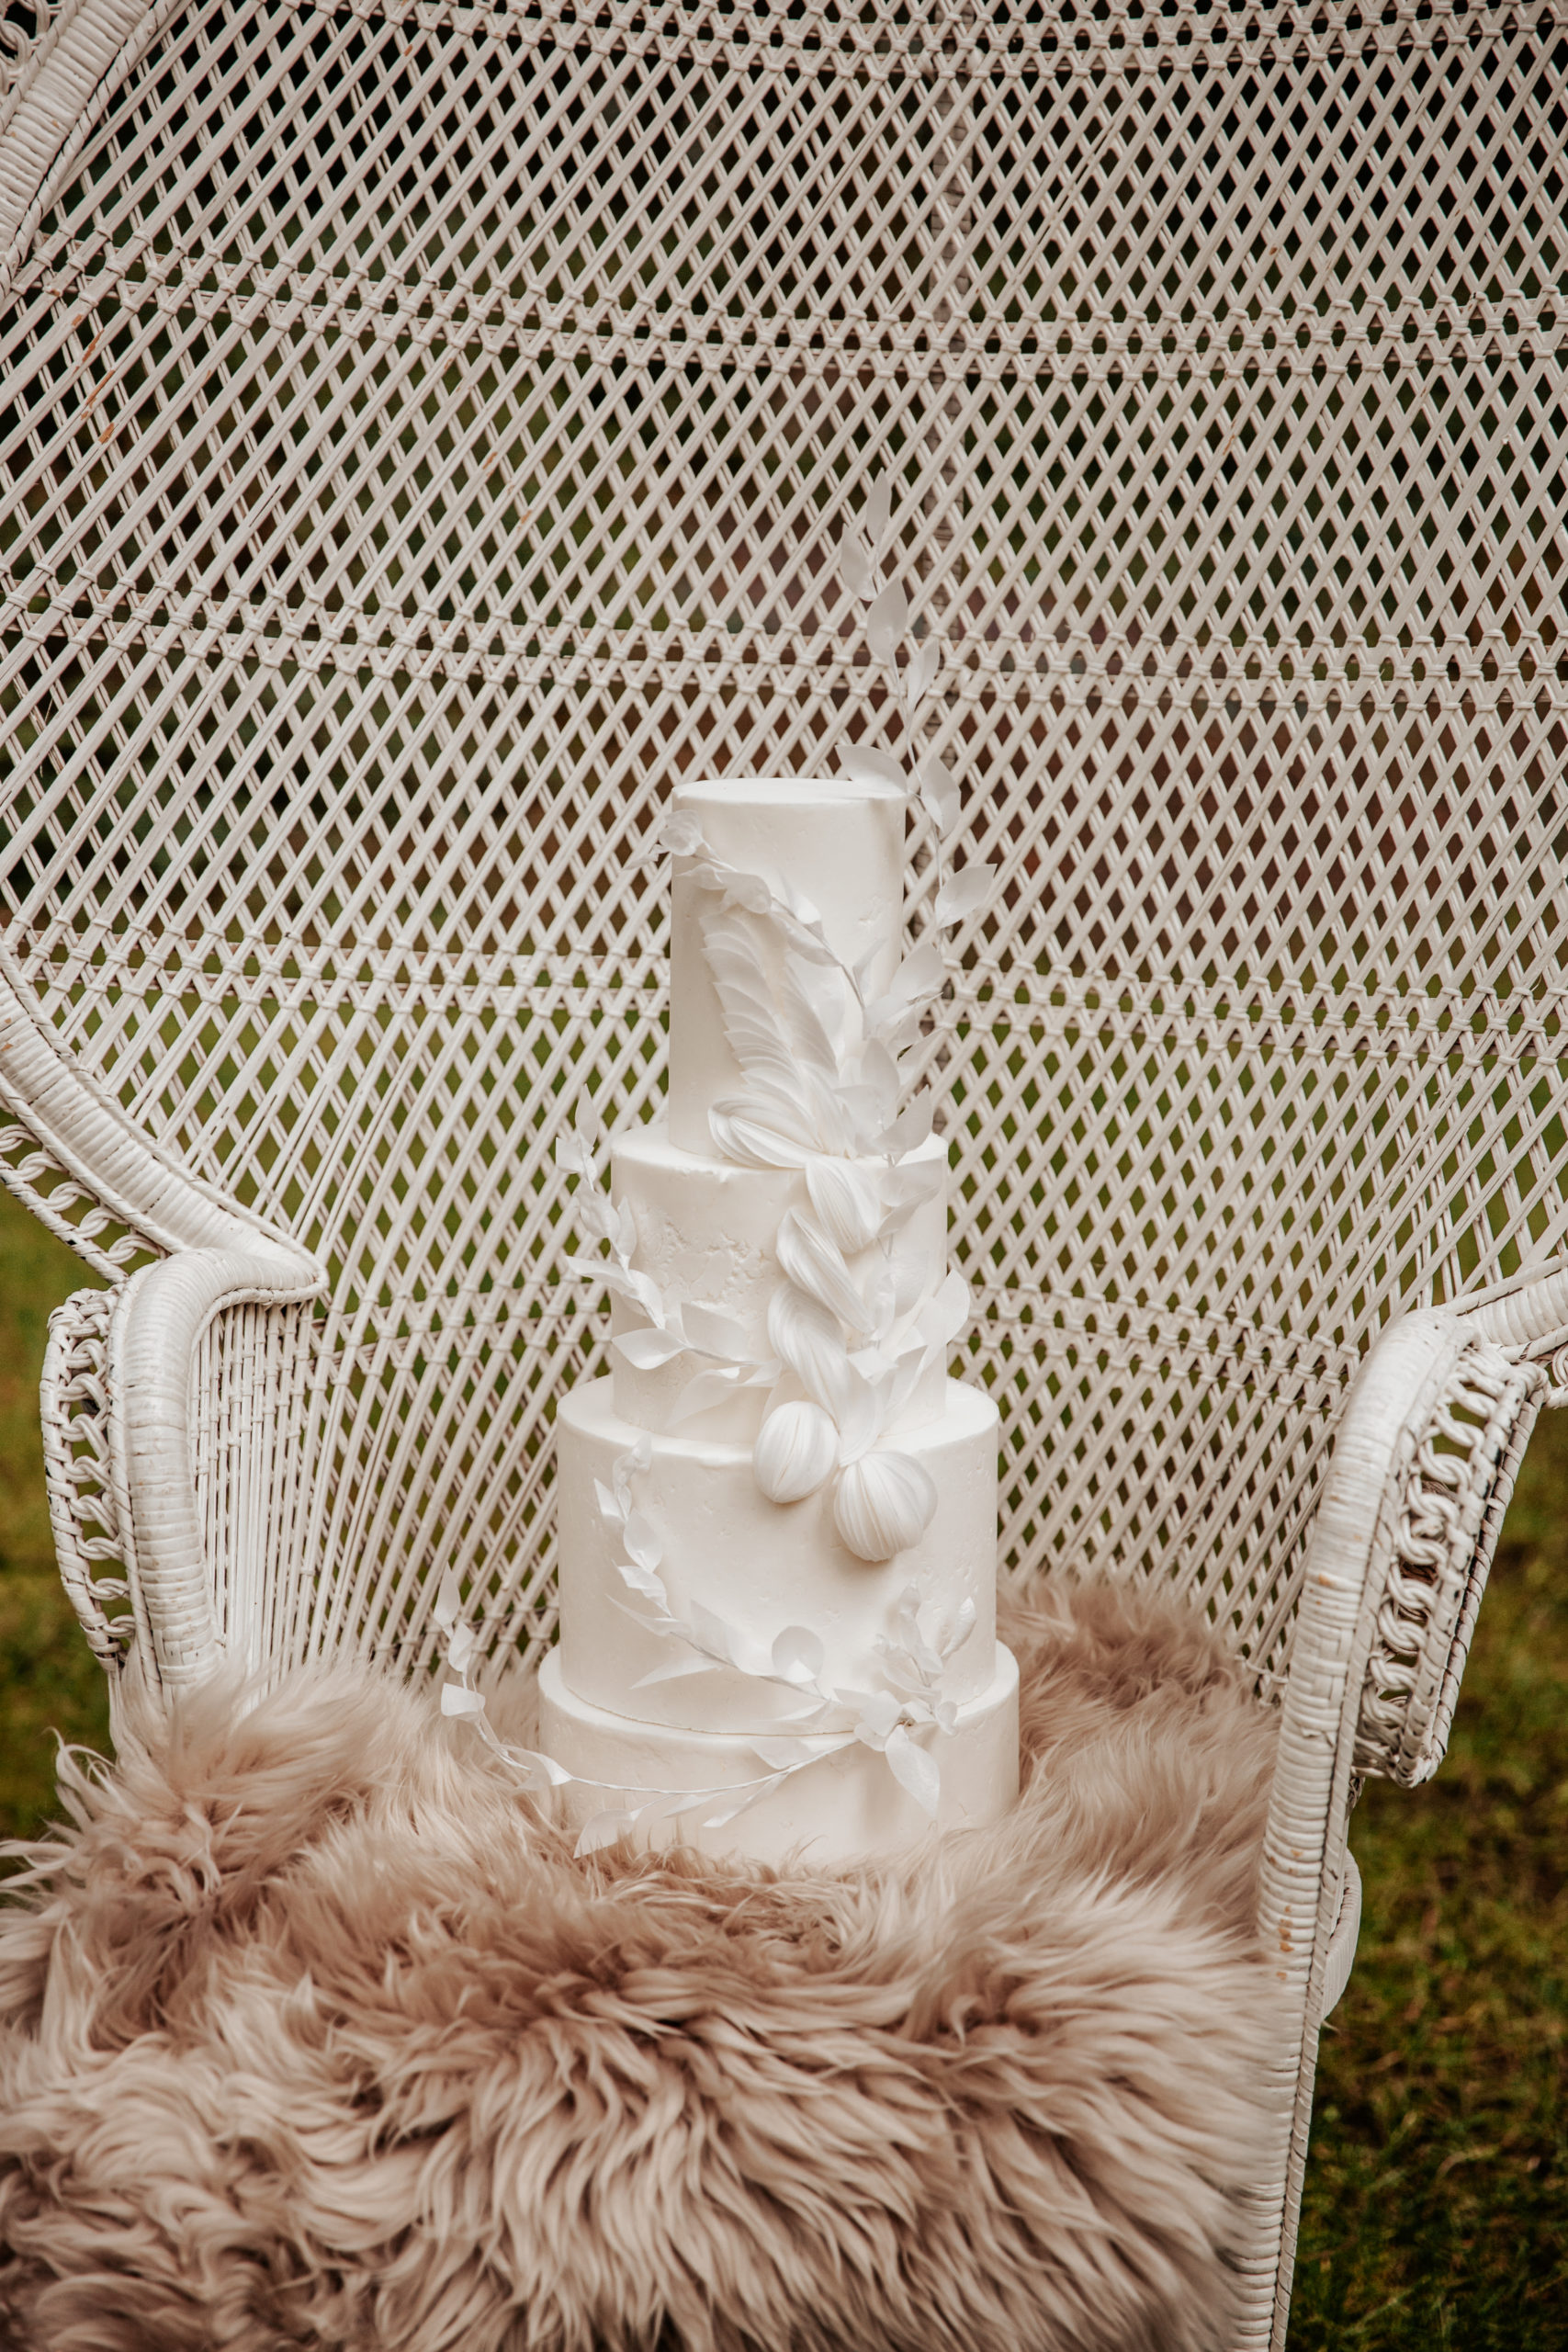 Decorative white cake by Cobi and Coco Cakes, sat on a wicker peacock chair